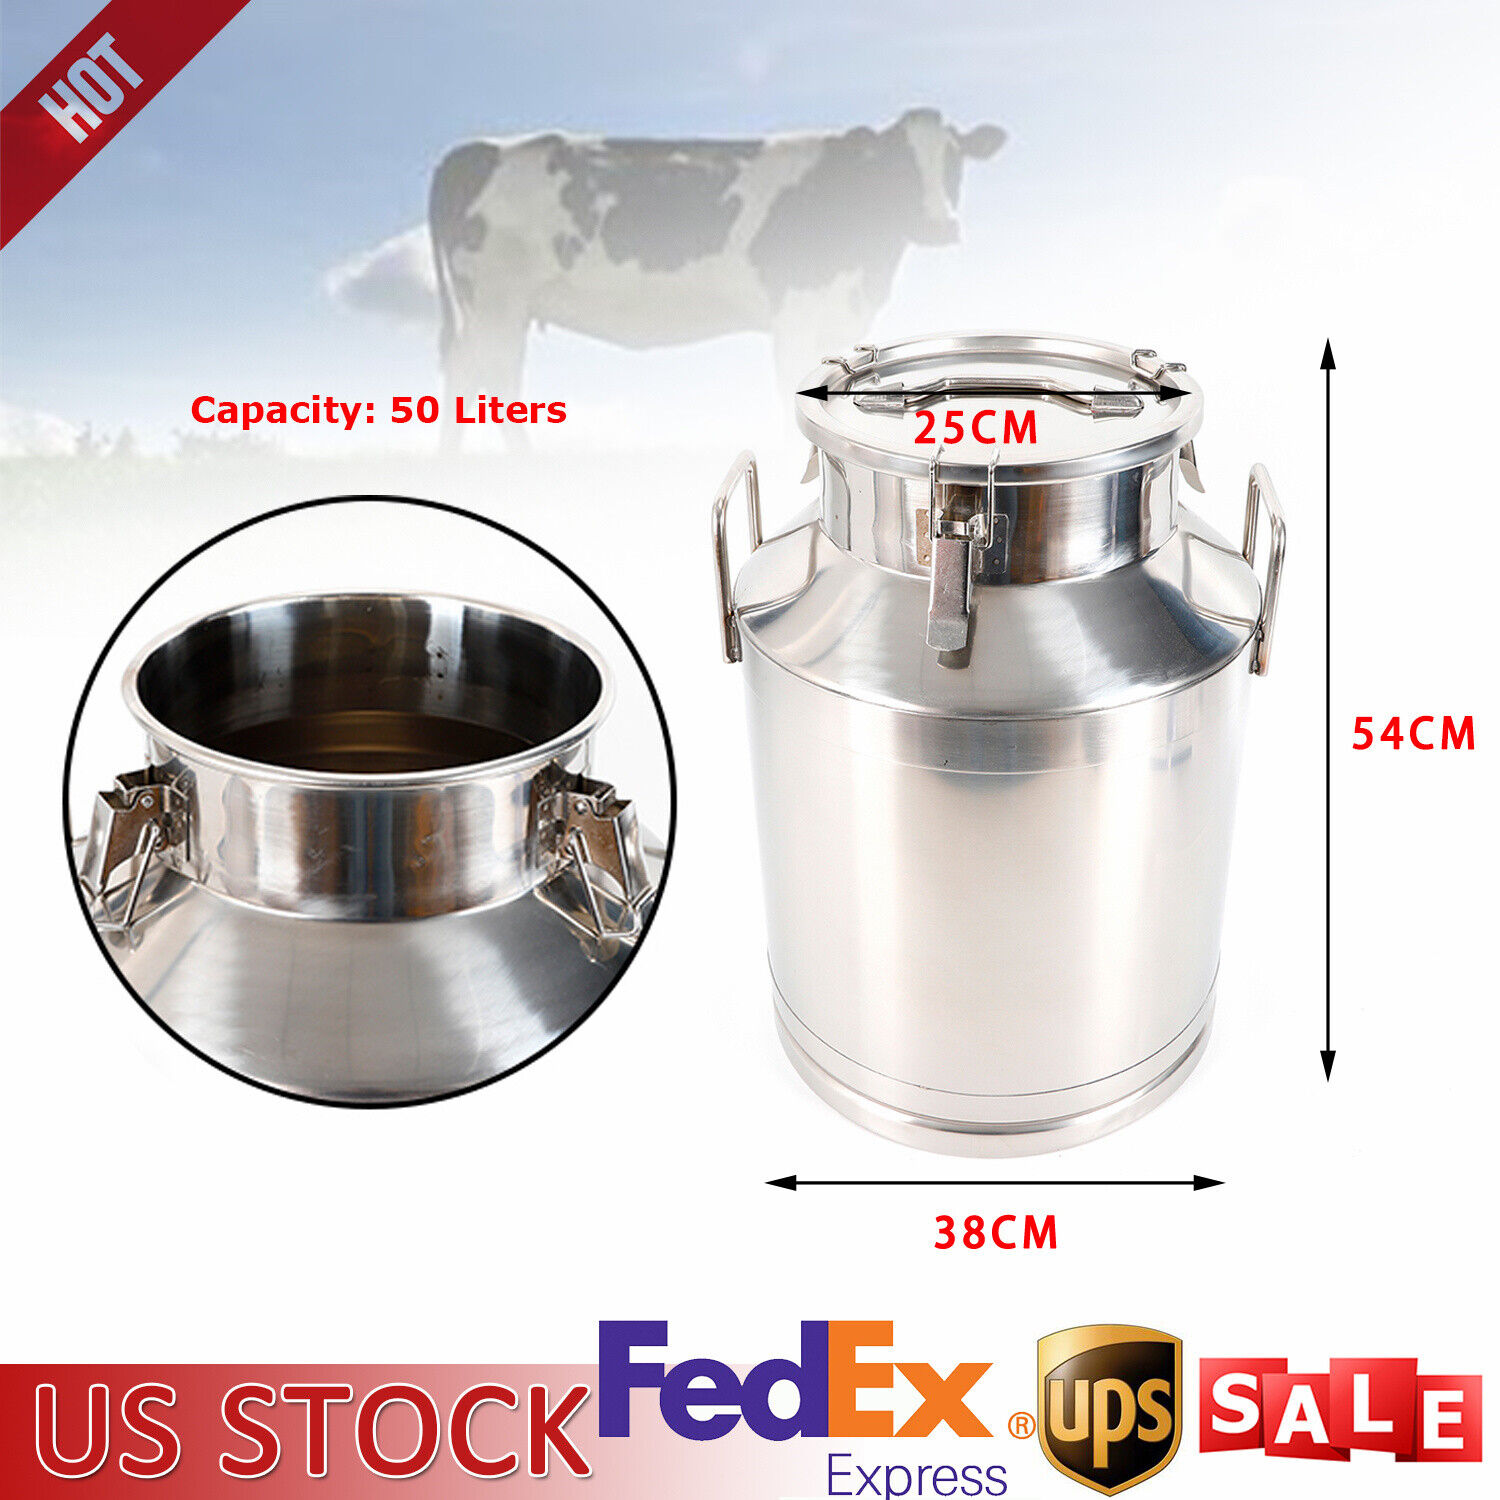 50L/13.25Gallon Milk Can Stainless Steel Dairy Storage Containers For Restaurant